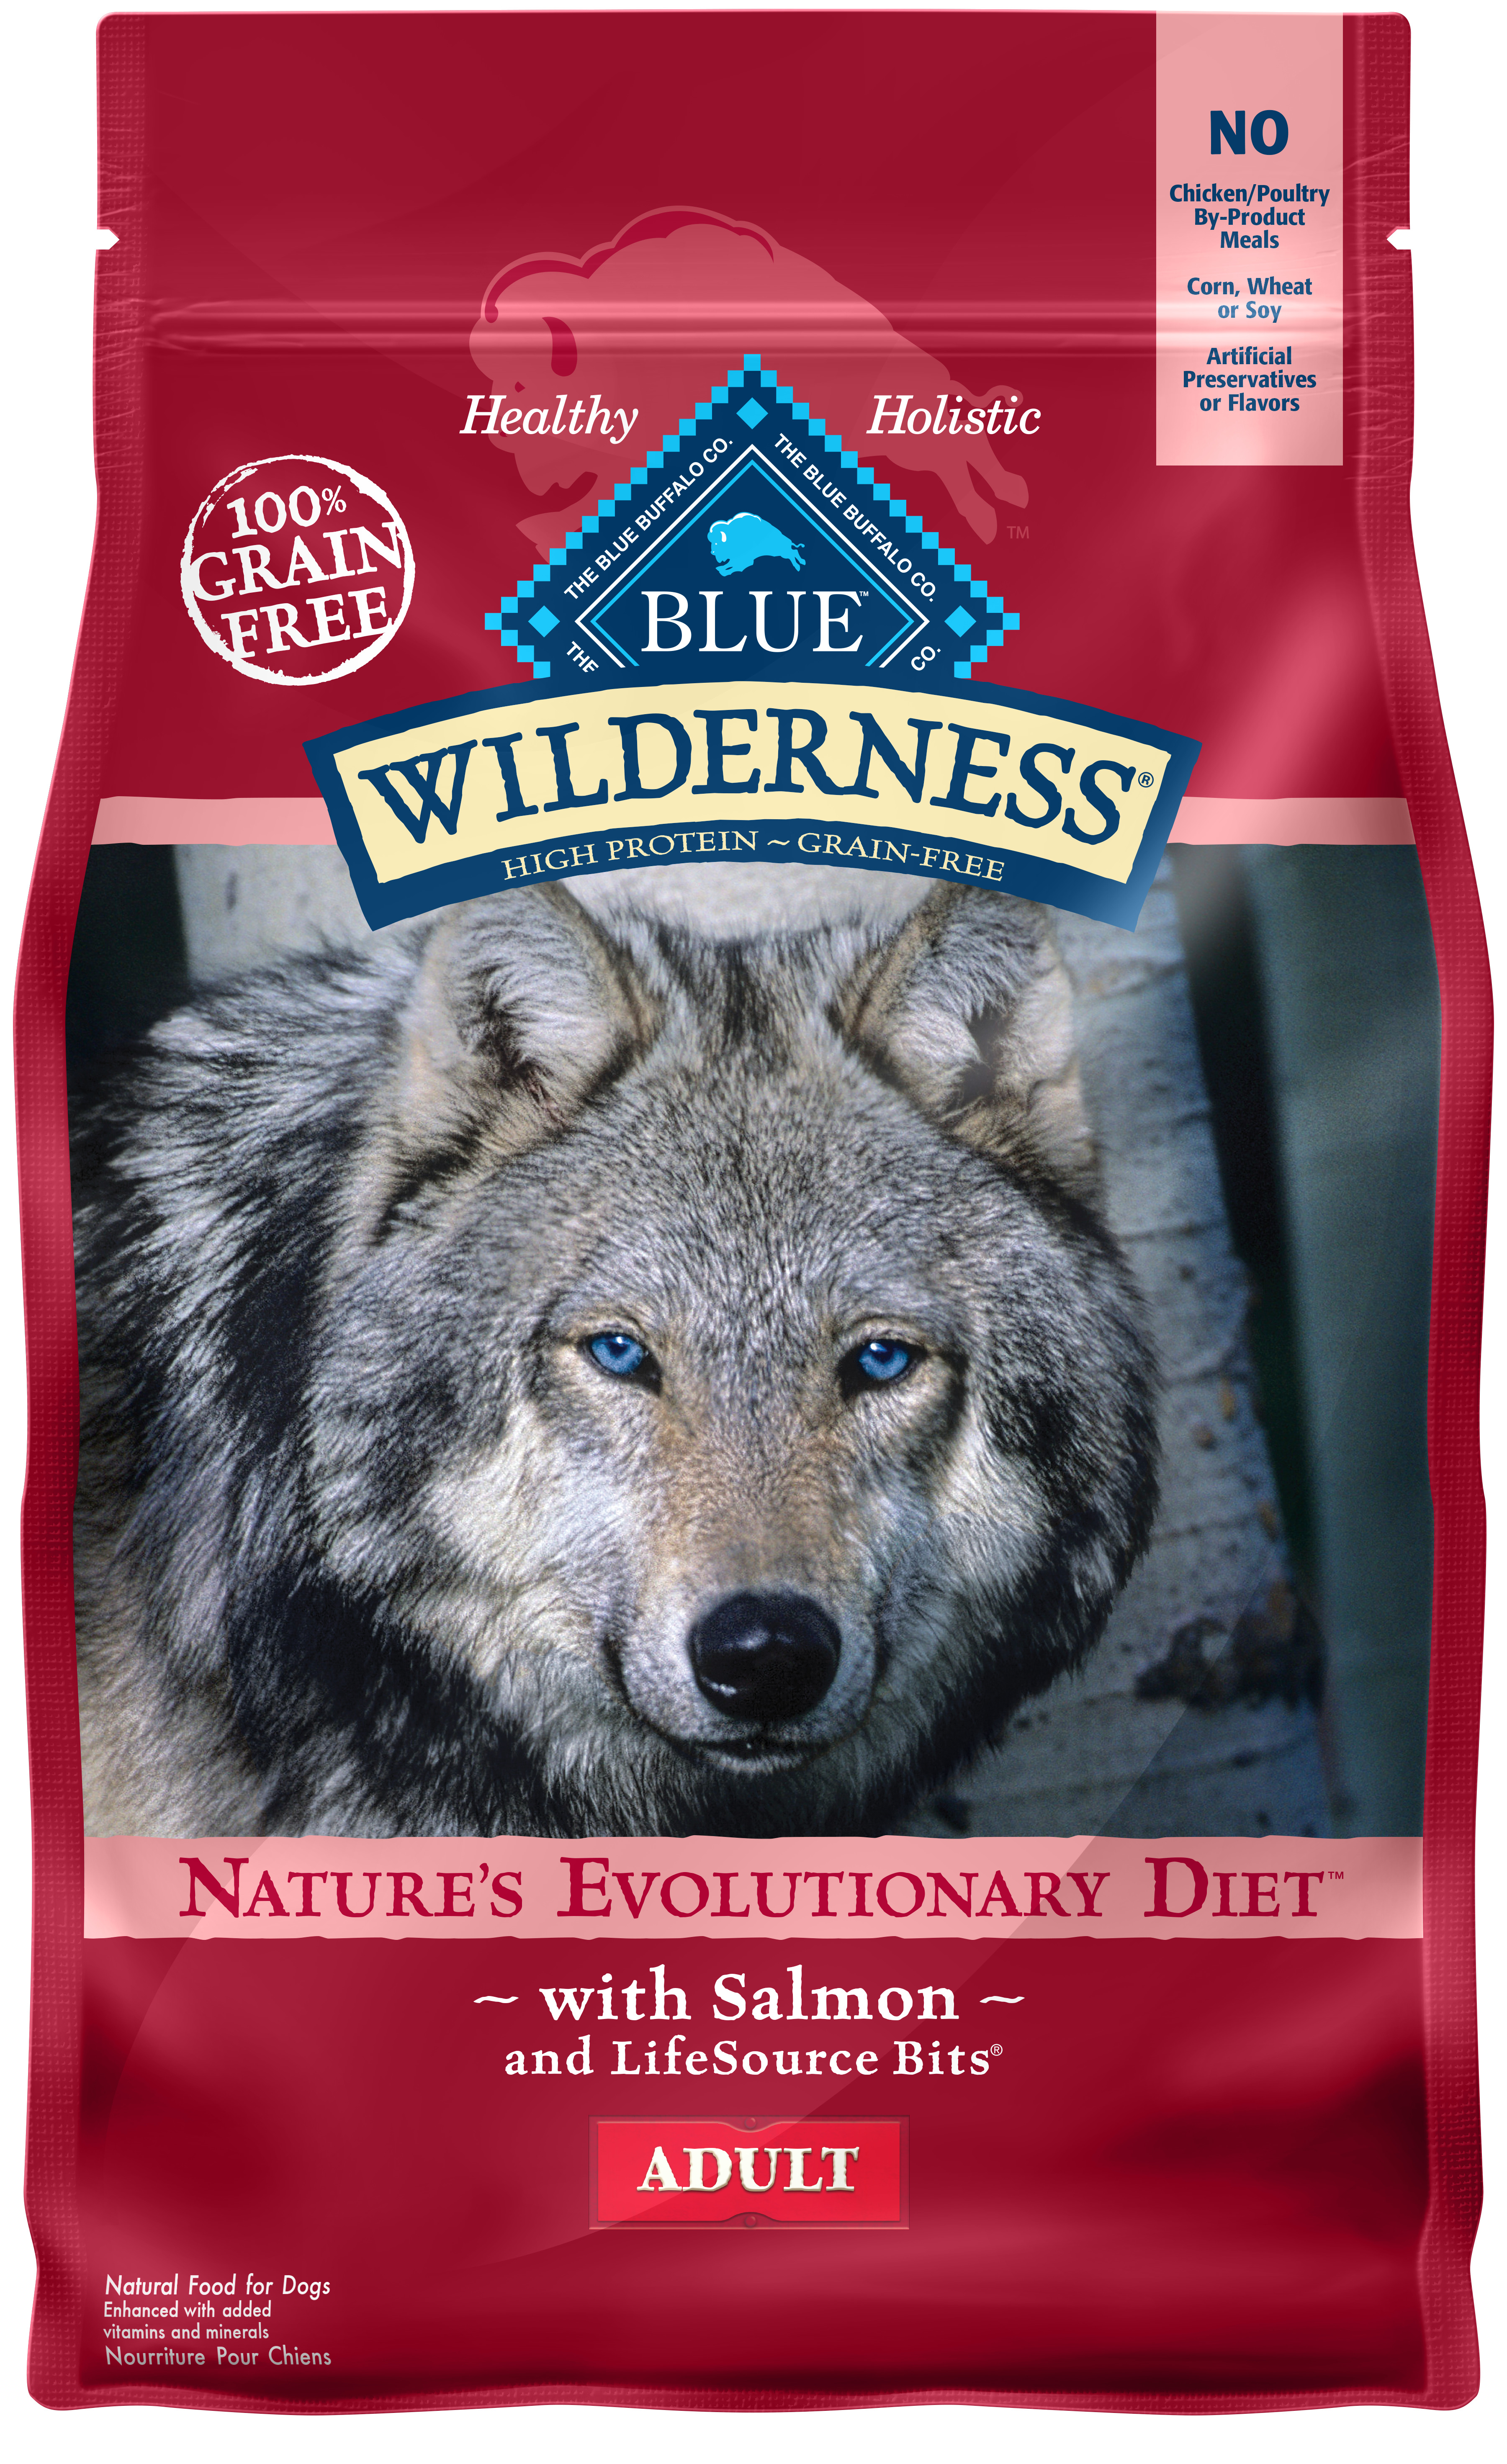 BLUE Wilderness Salmon Recipe for Adult Dogs, 4.5 lb